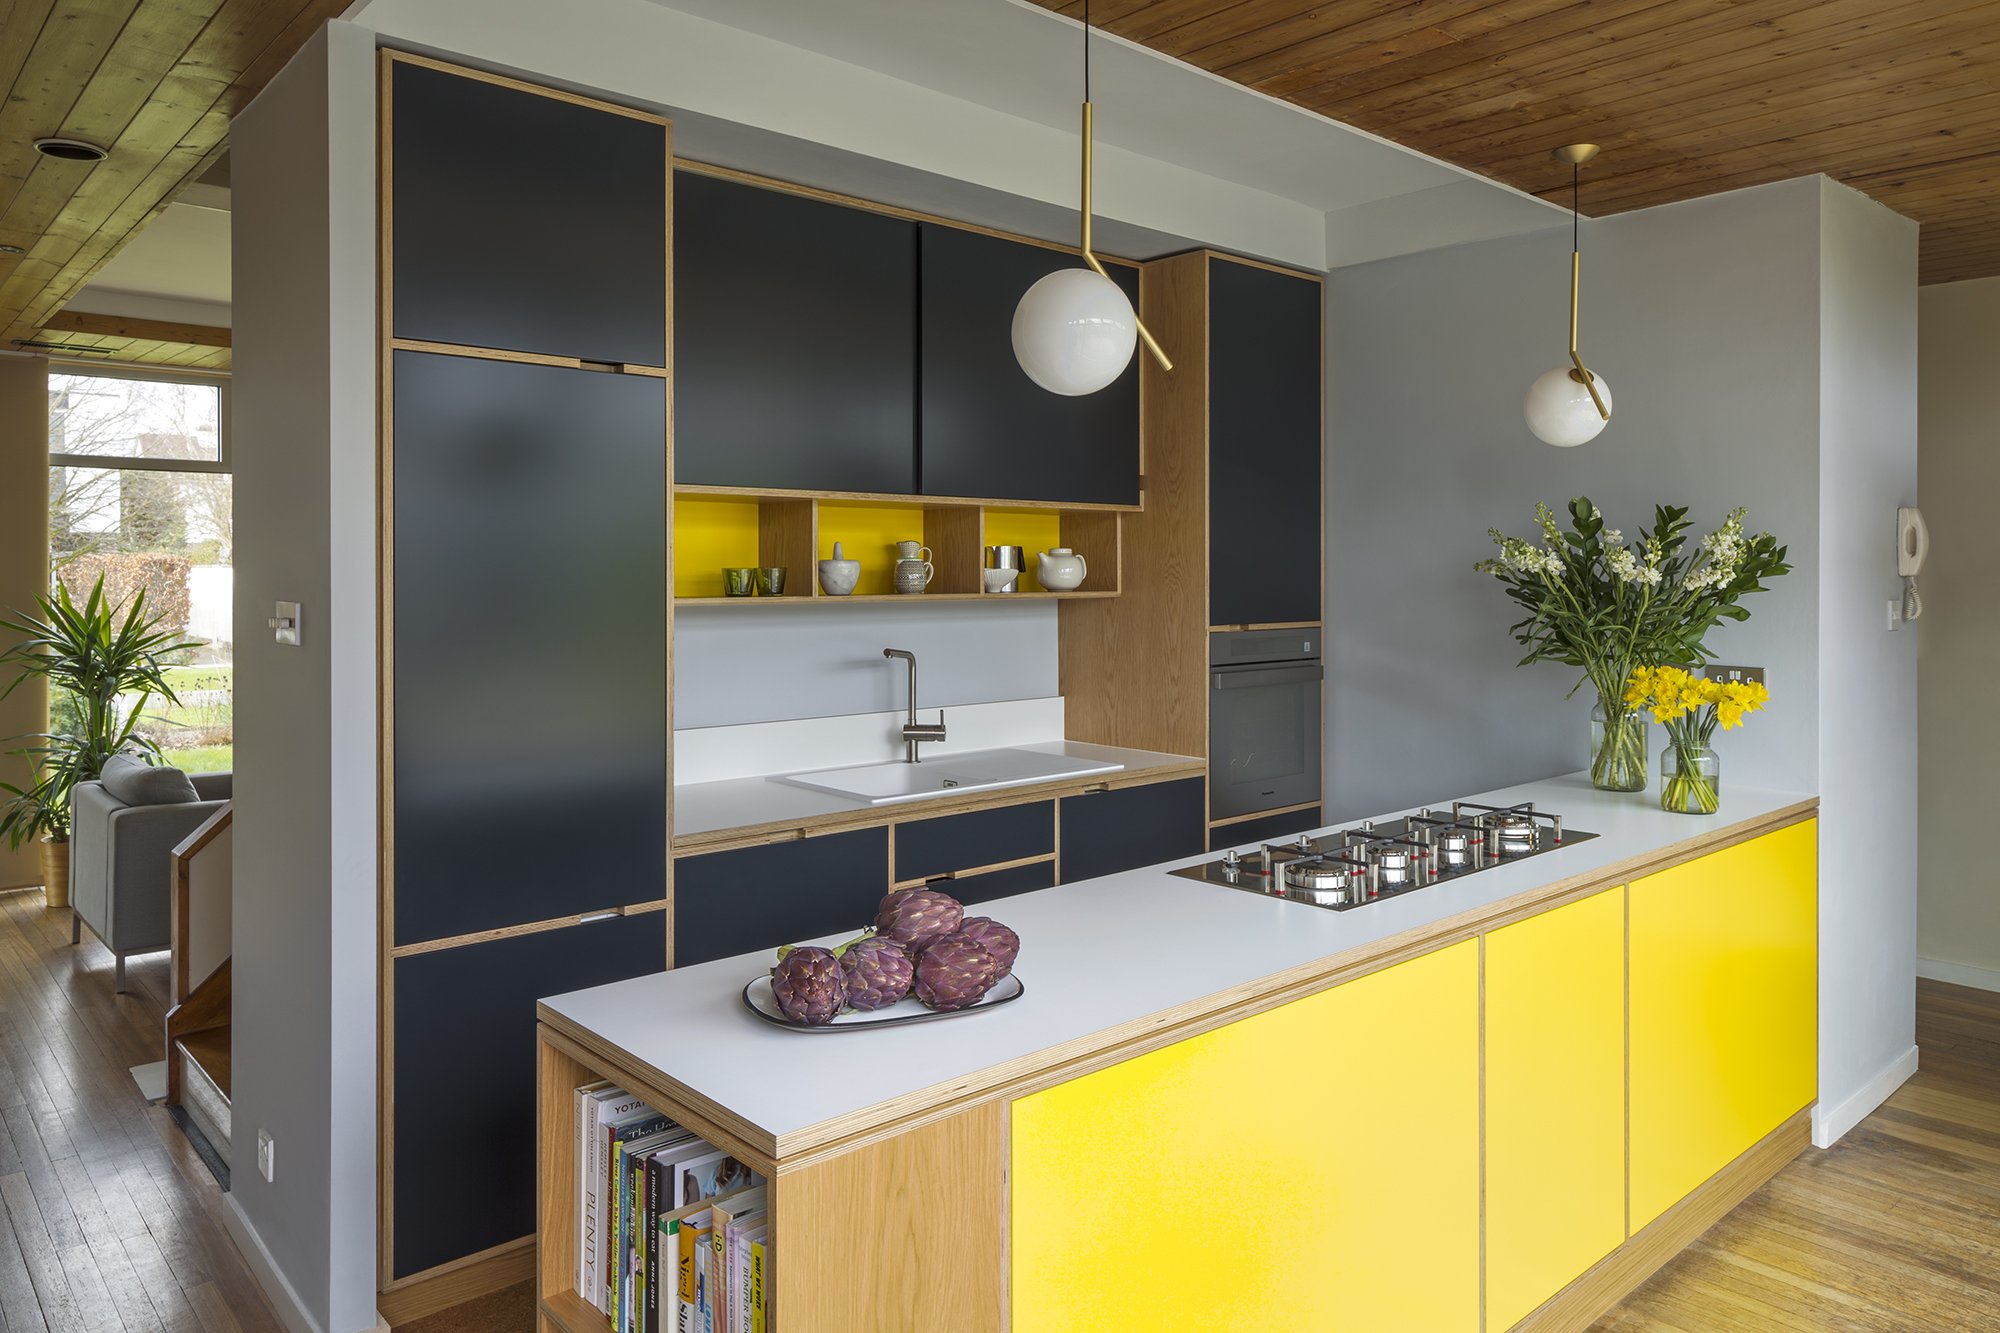 Uncommon Projects | Bespoke Plywood Kitchens & Furniture